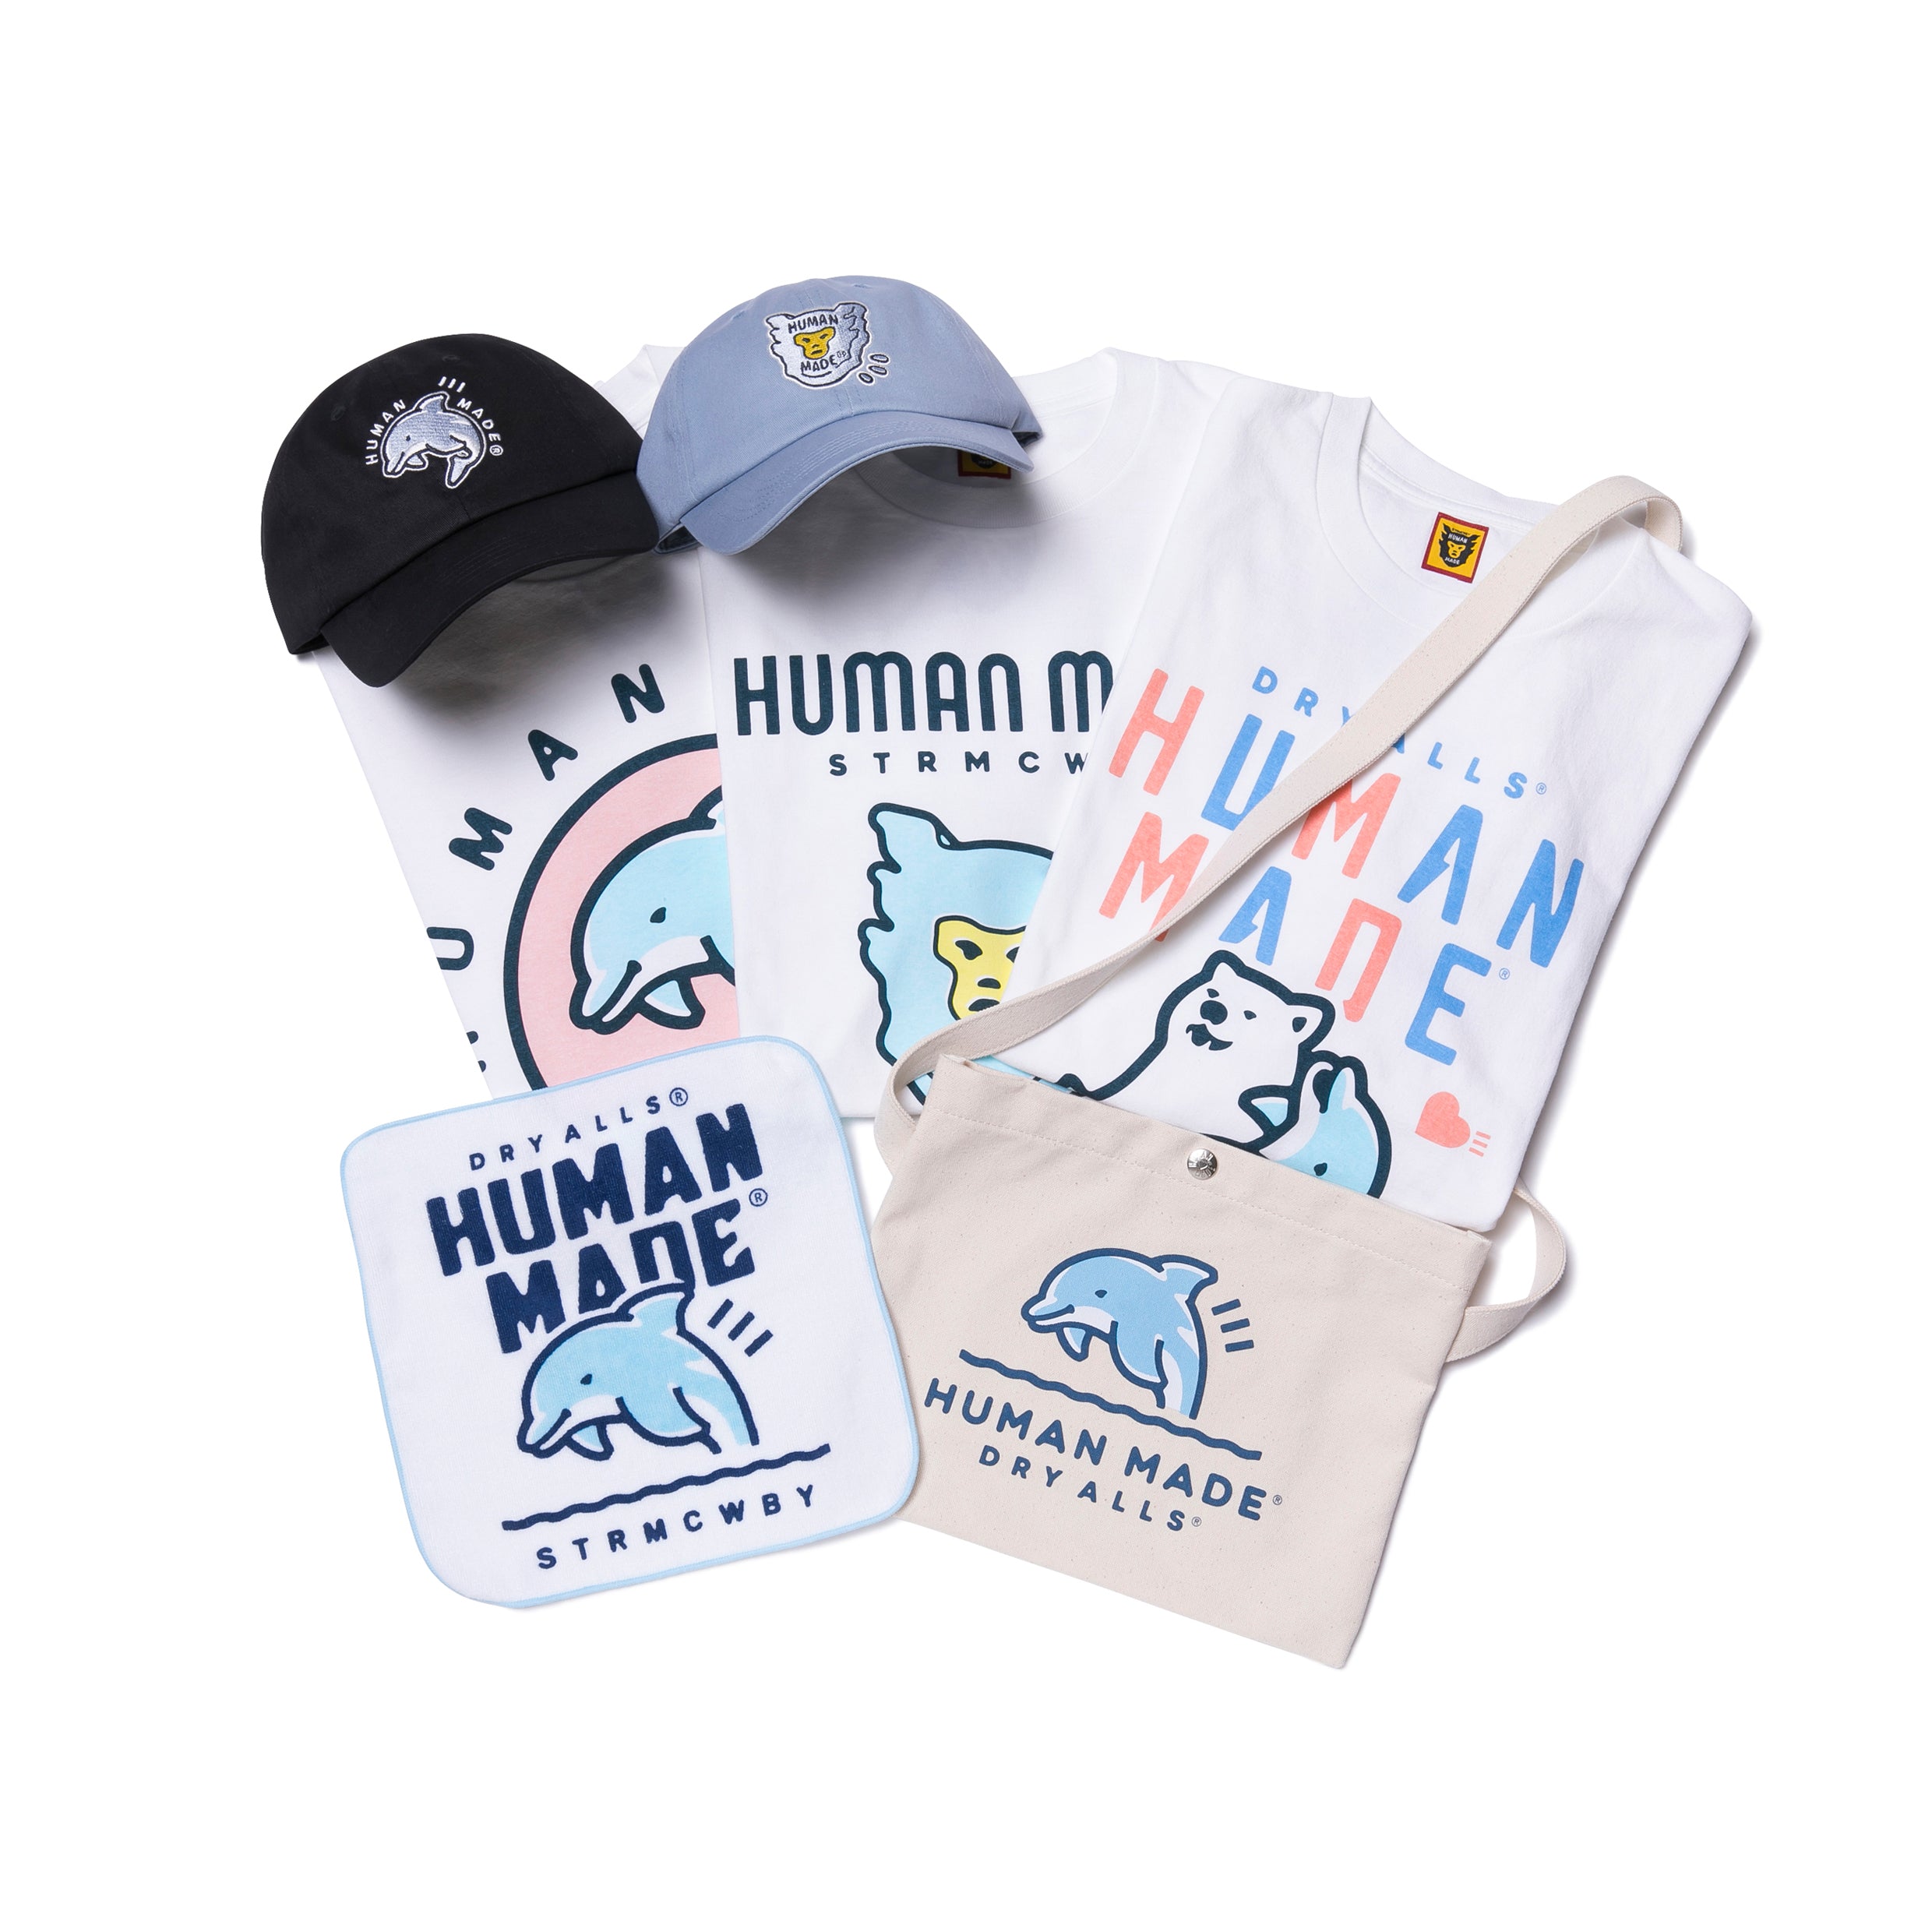 human made store by reo | www.innoveering.net